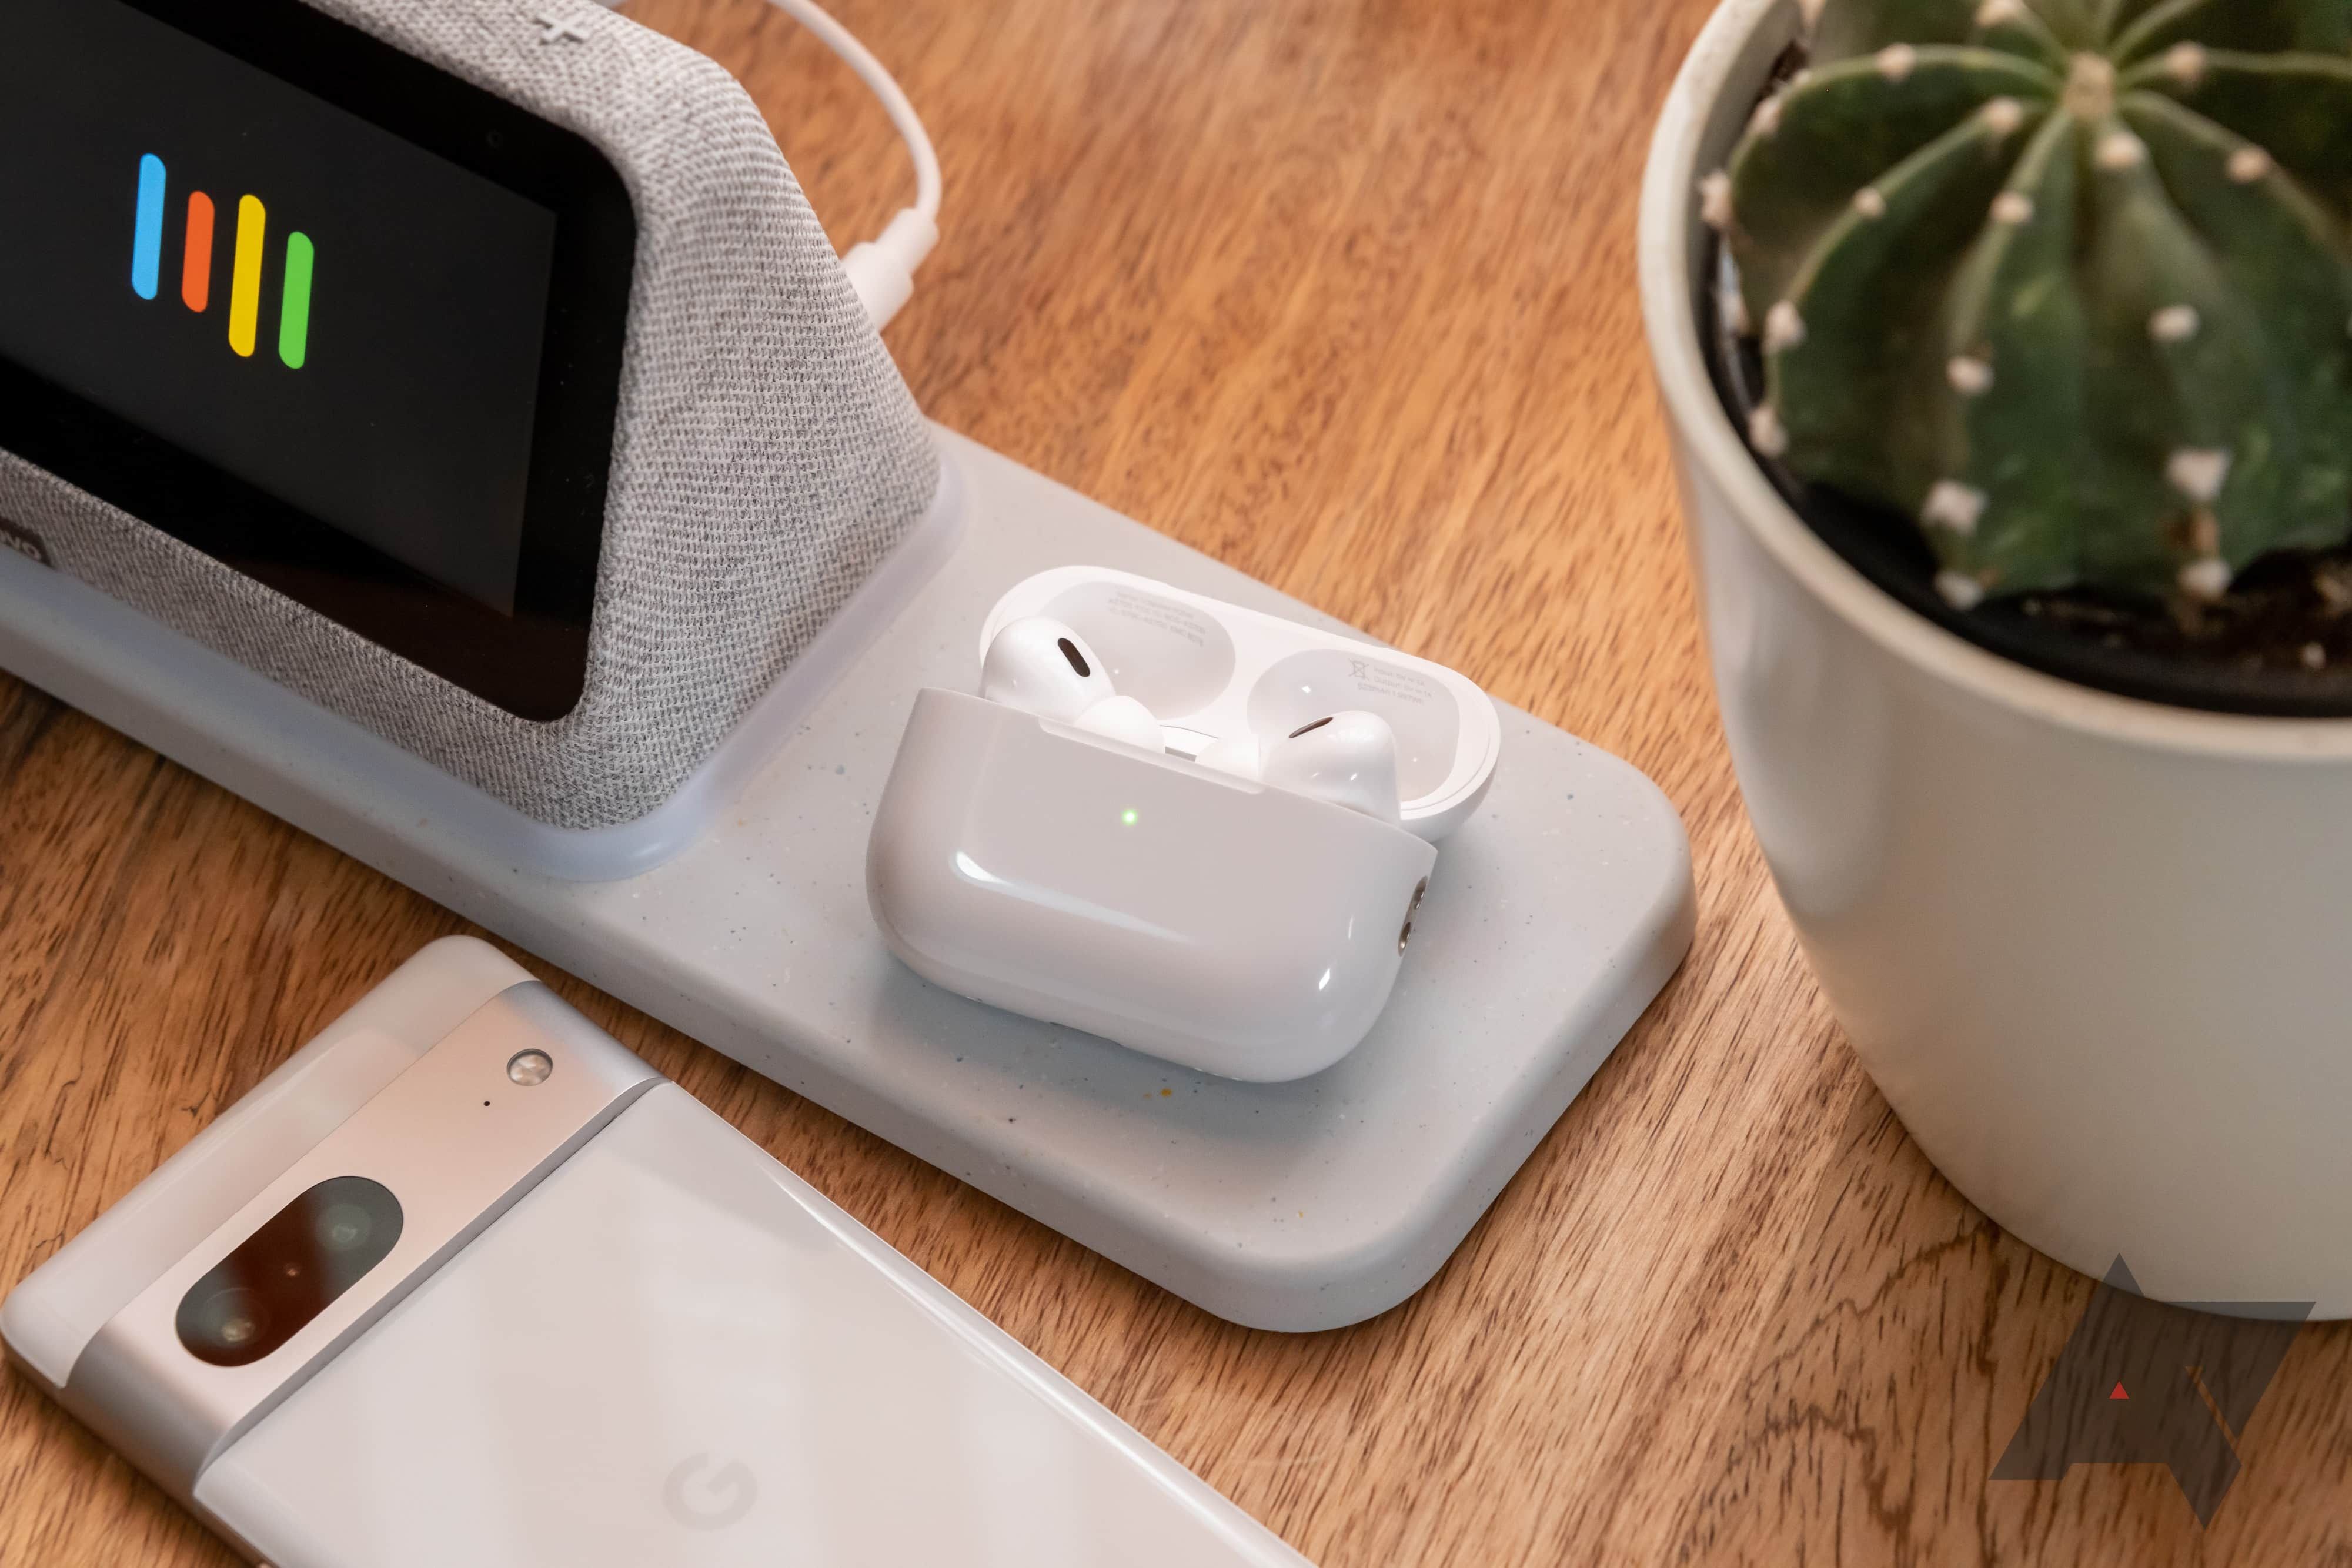 Wireless earbuds in their charging case on a table with a smartphone, a smart display, and a small cactus.